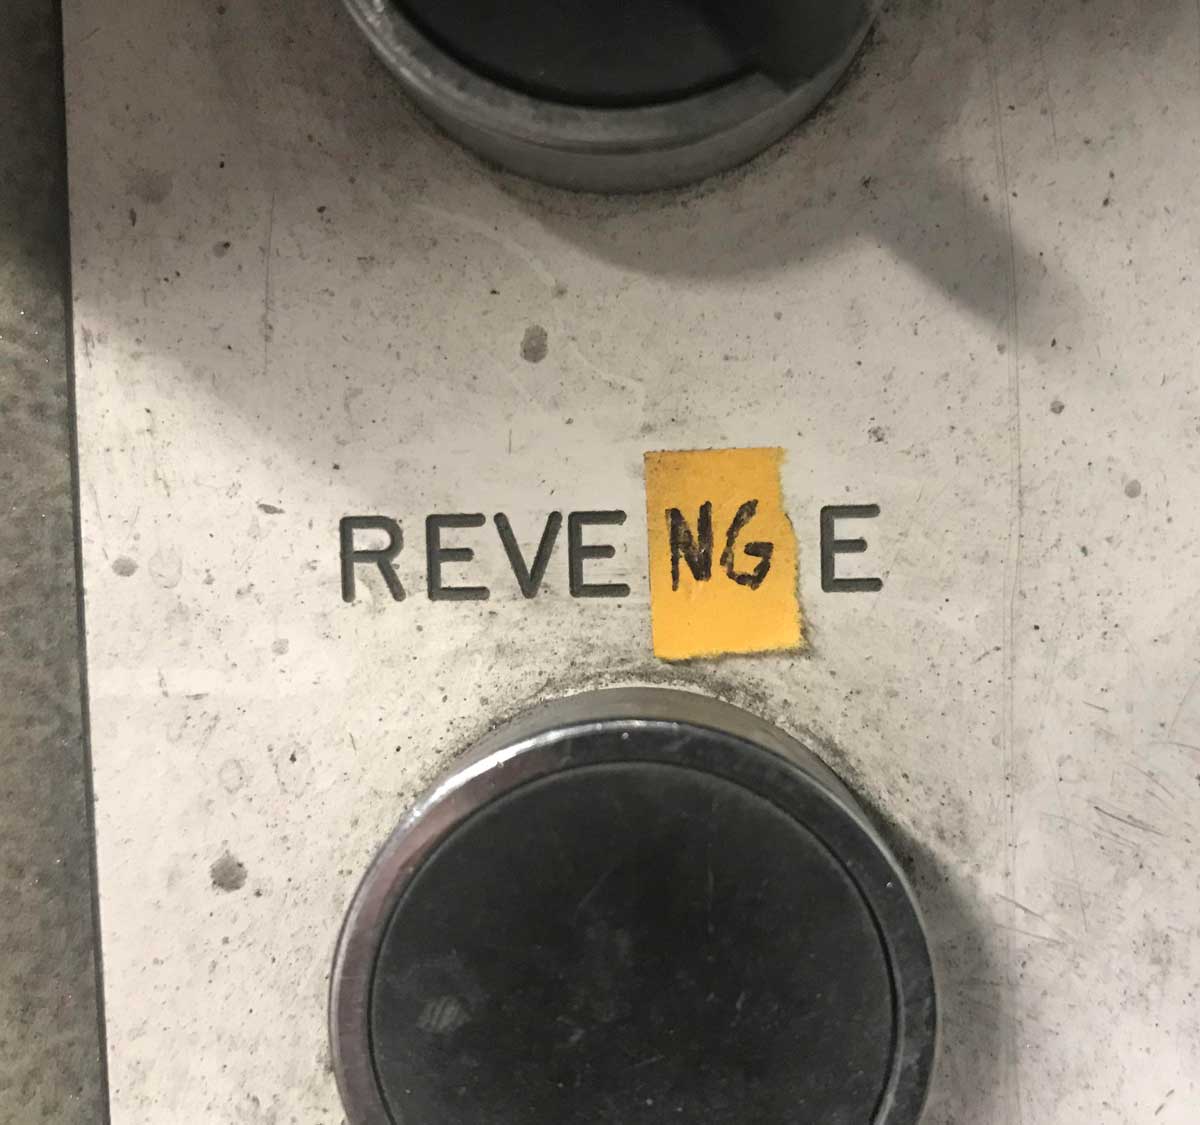 Somebody modified the ‘reverse’ button at work